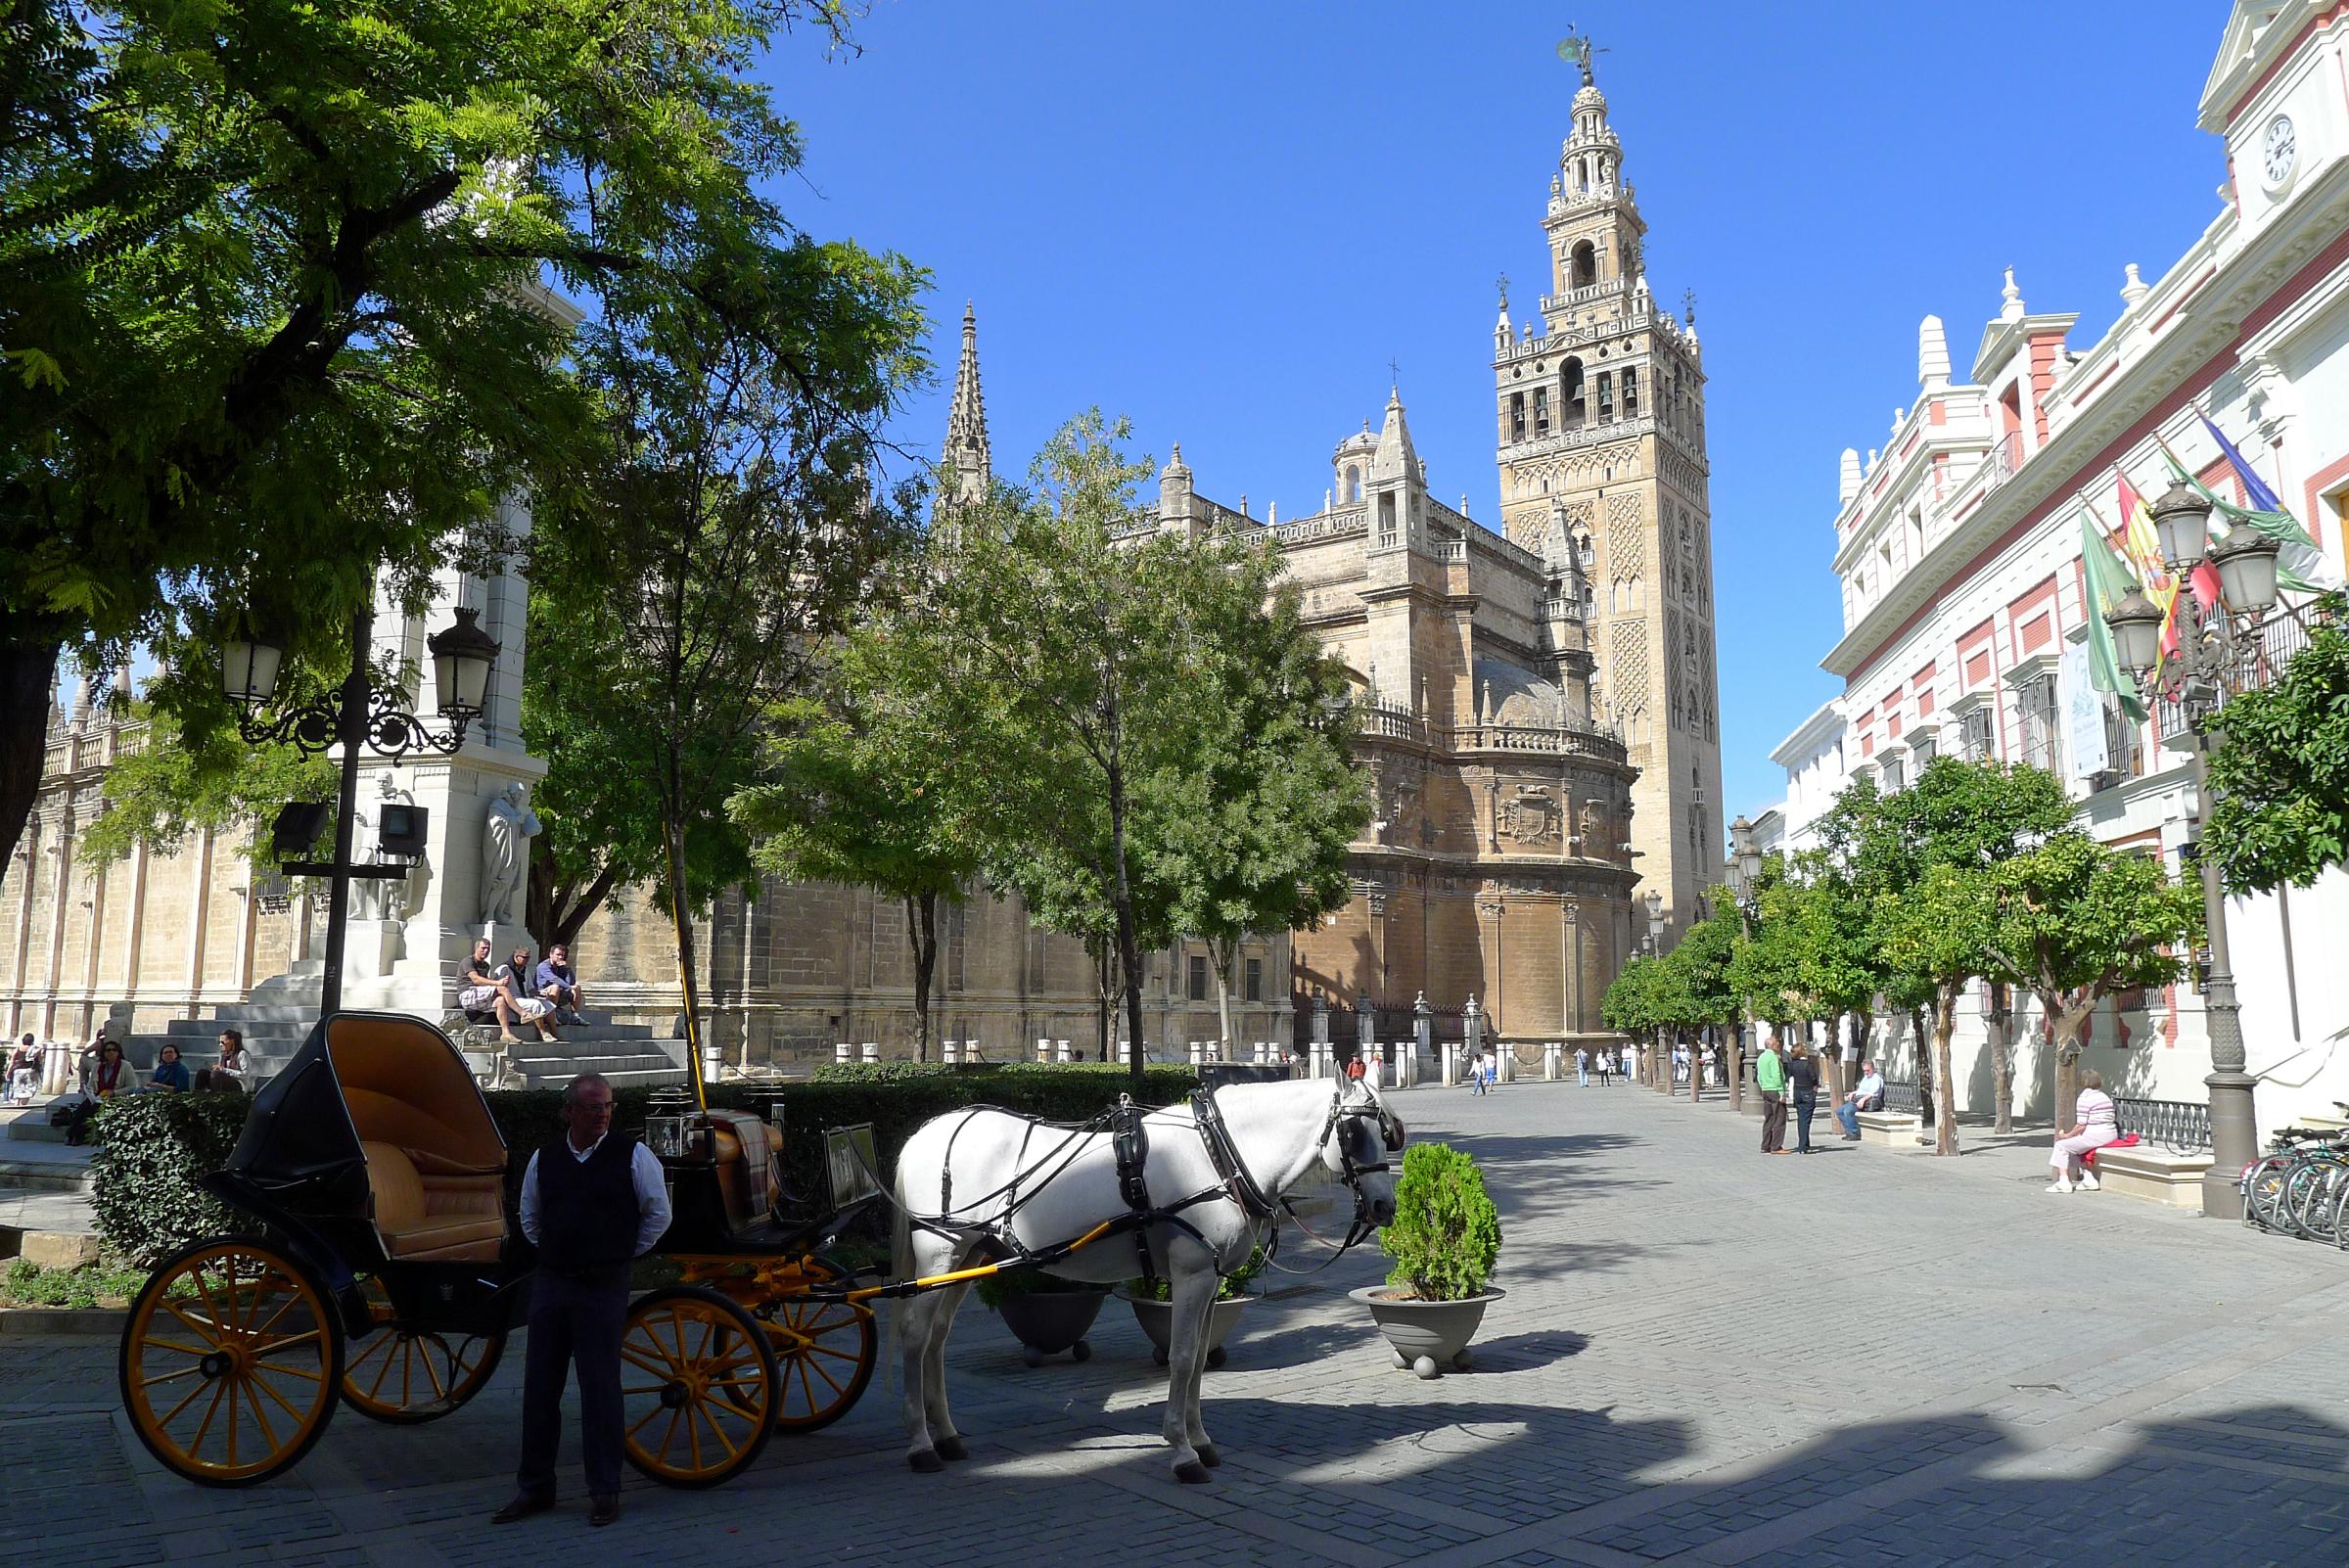 Seville cathedral